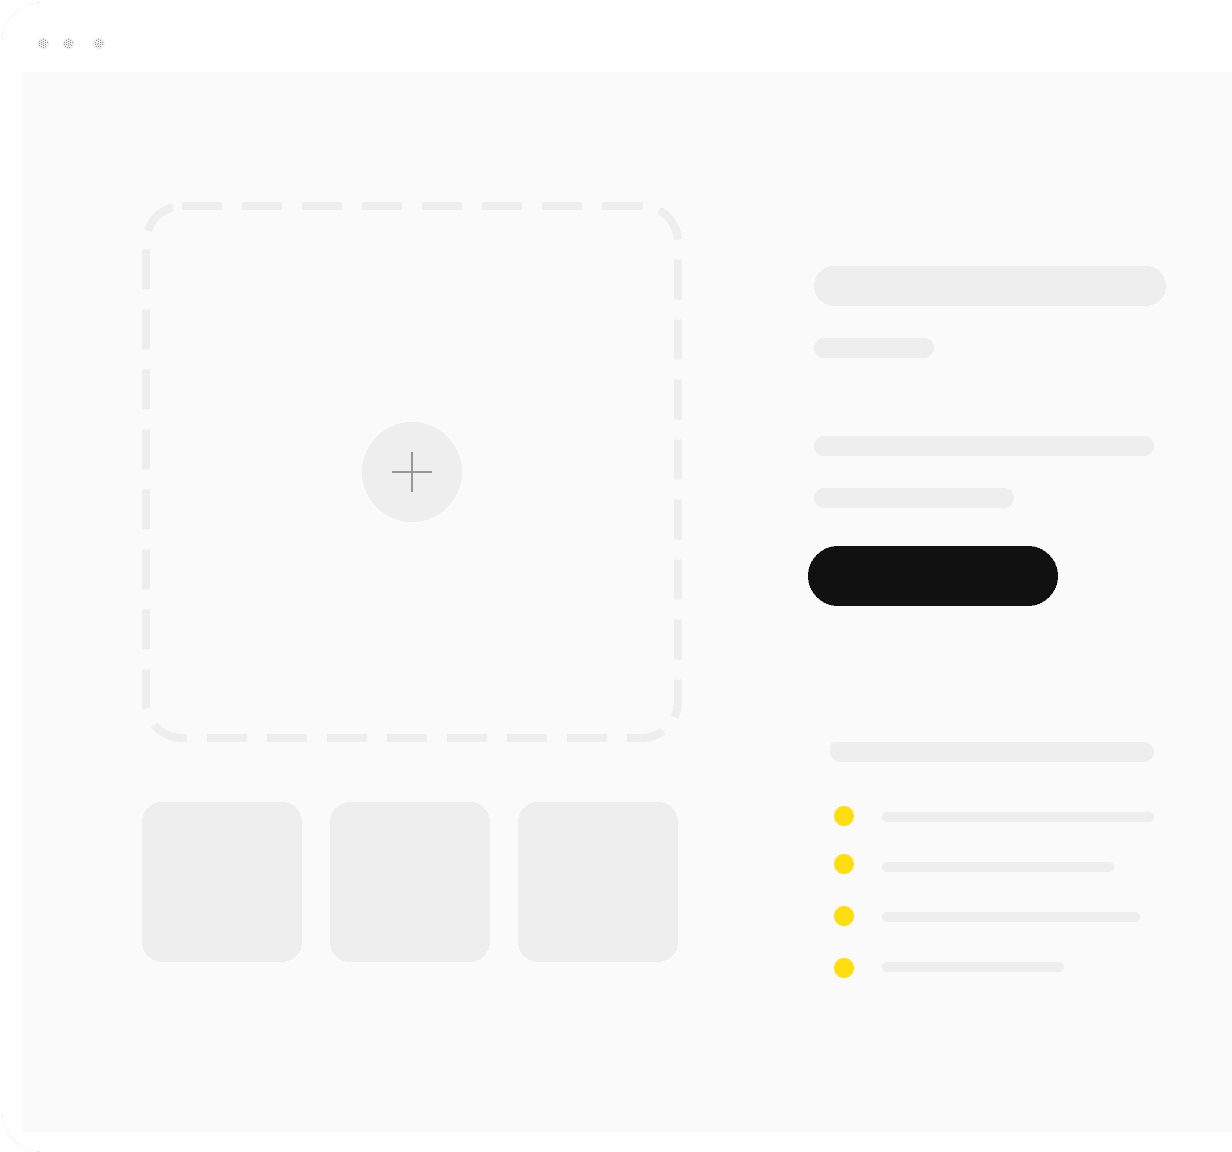 UI design for a website on a white background, displayed on a tablet screen.